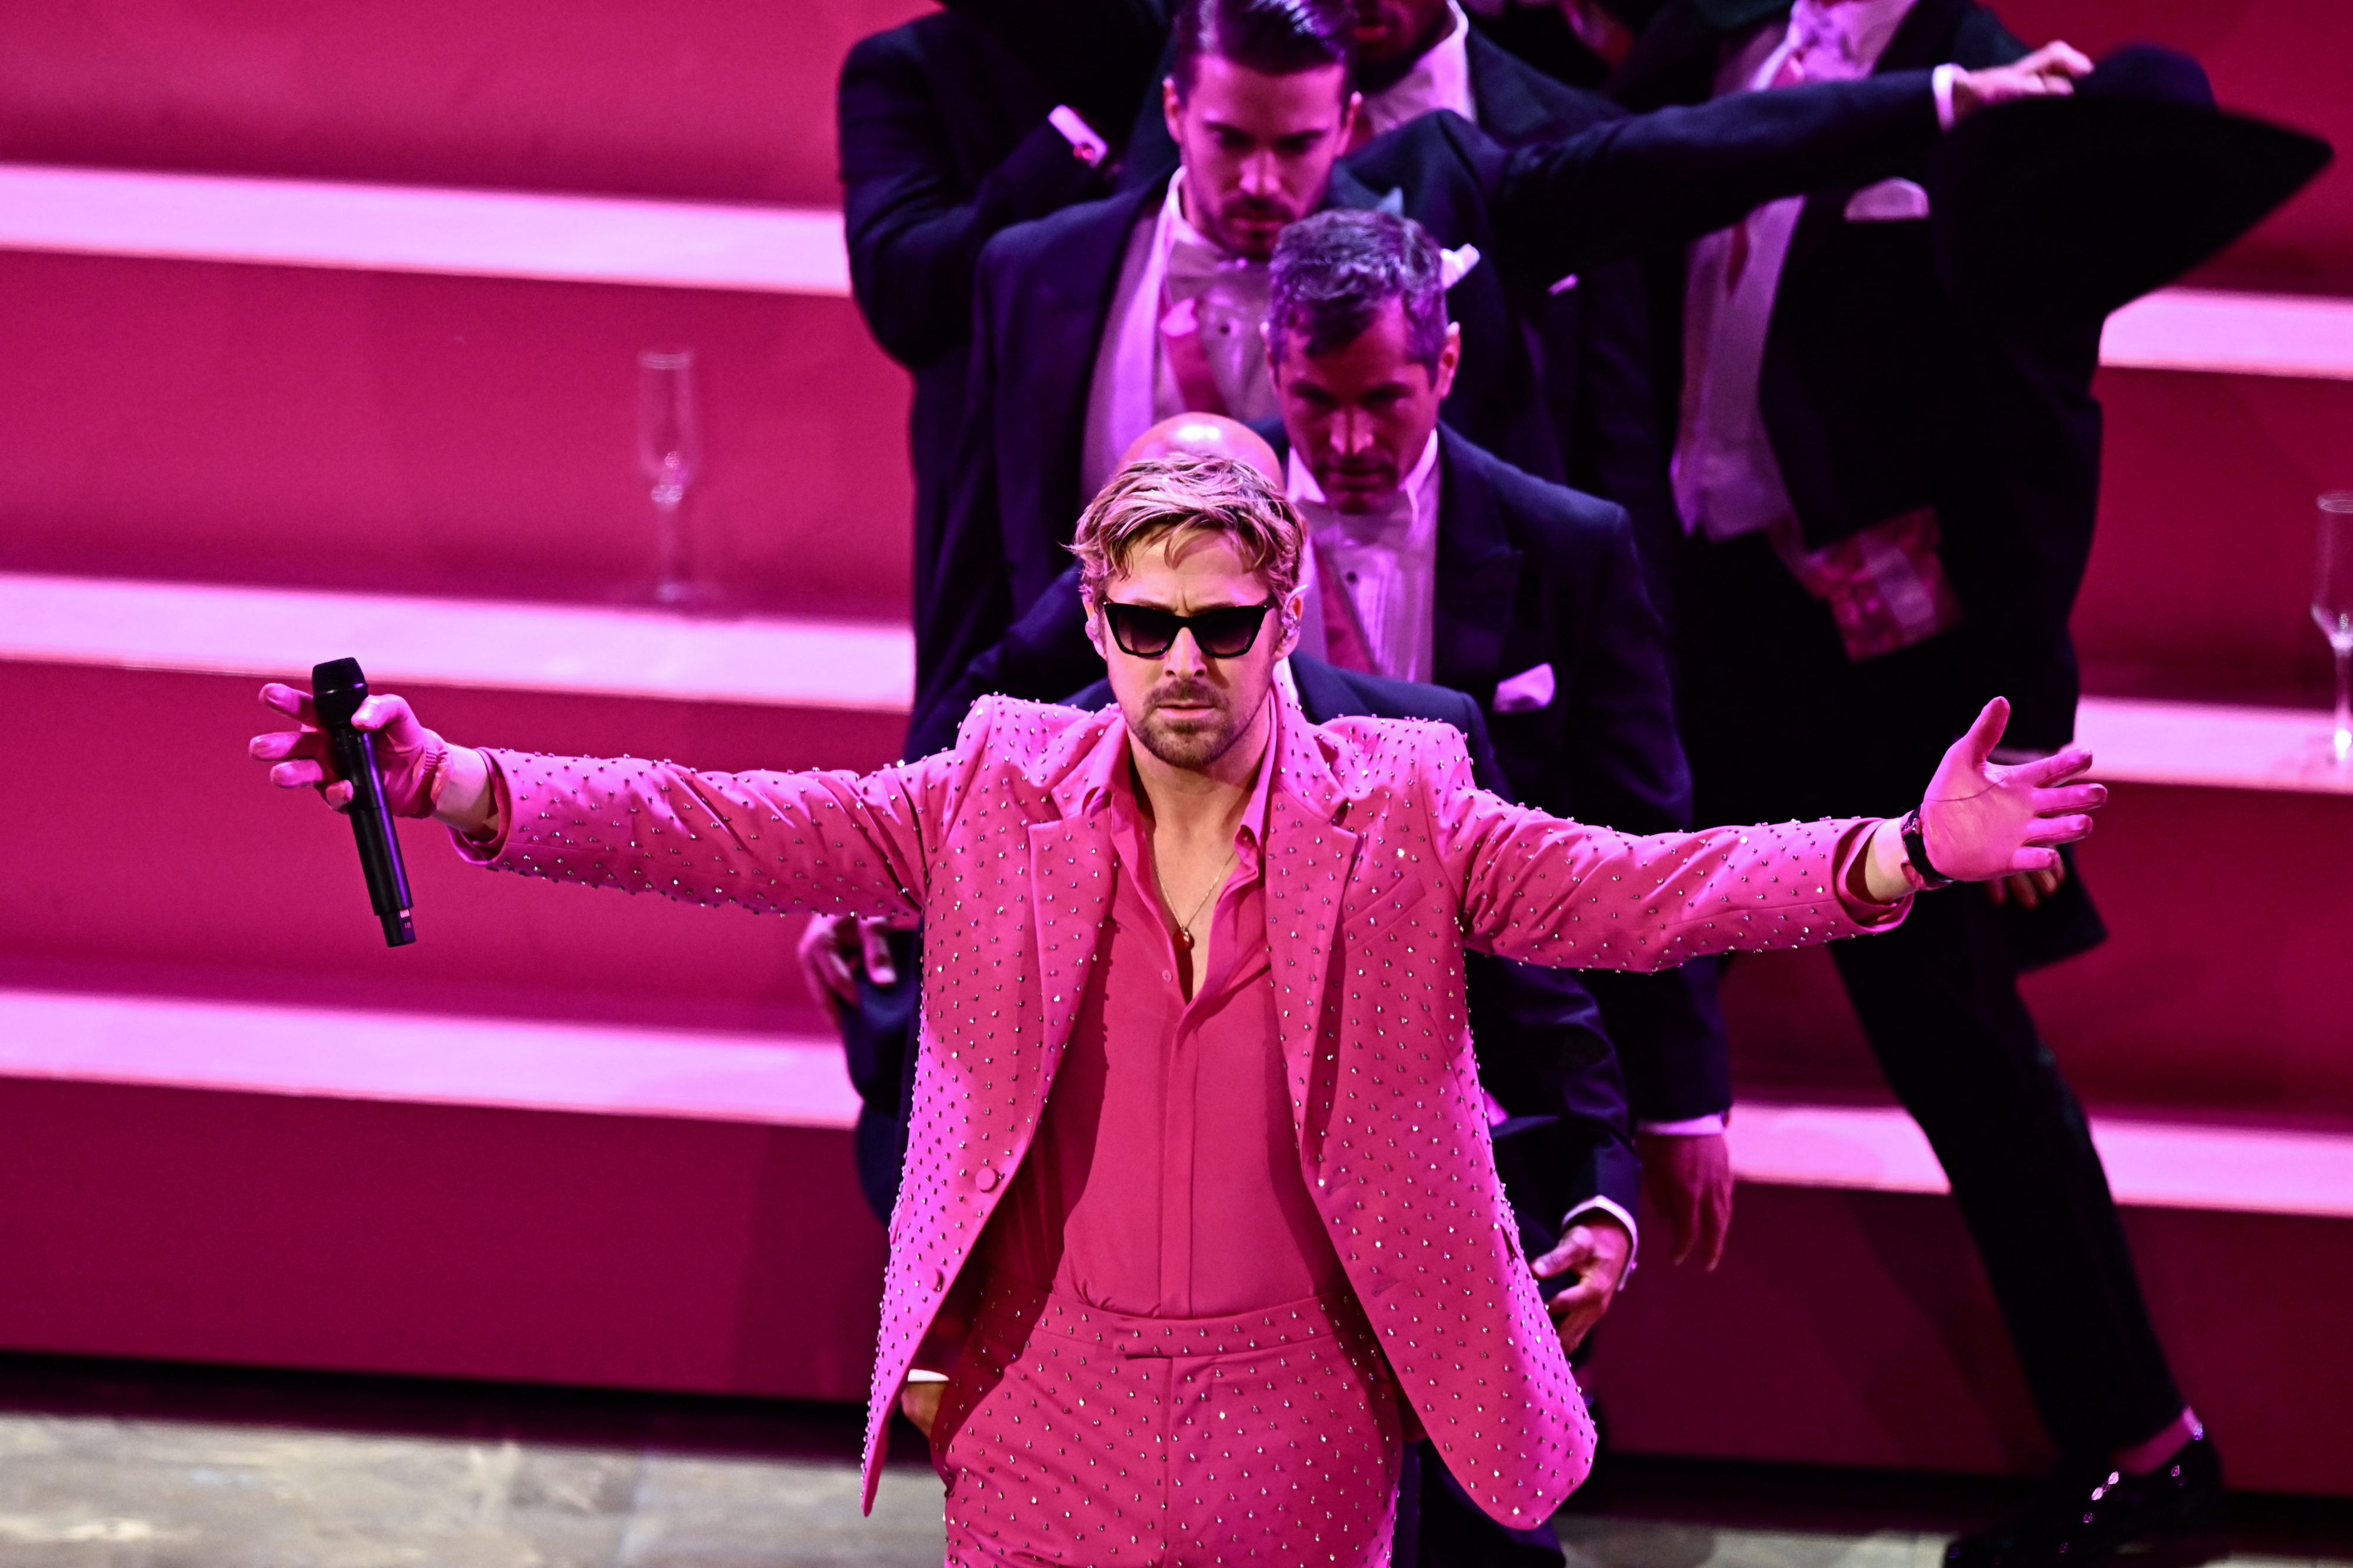 Ryan Gosling on stage in a sparkling pink jacket with arms outstretched